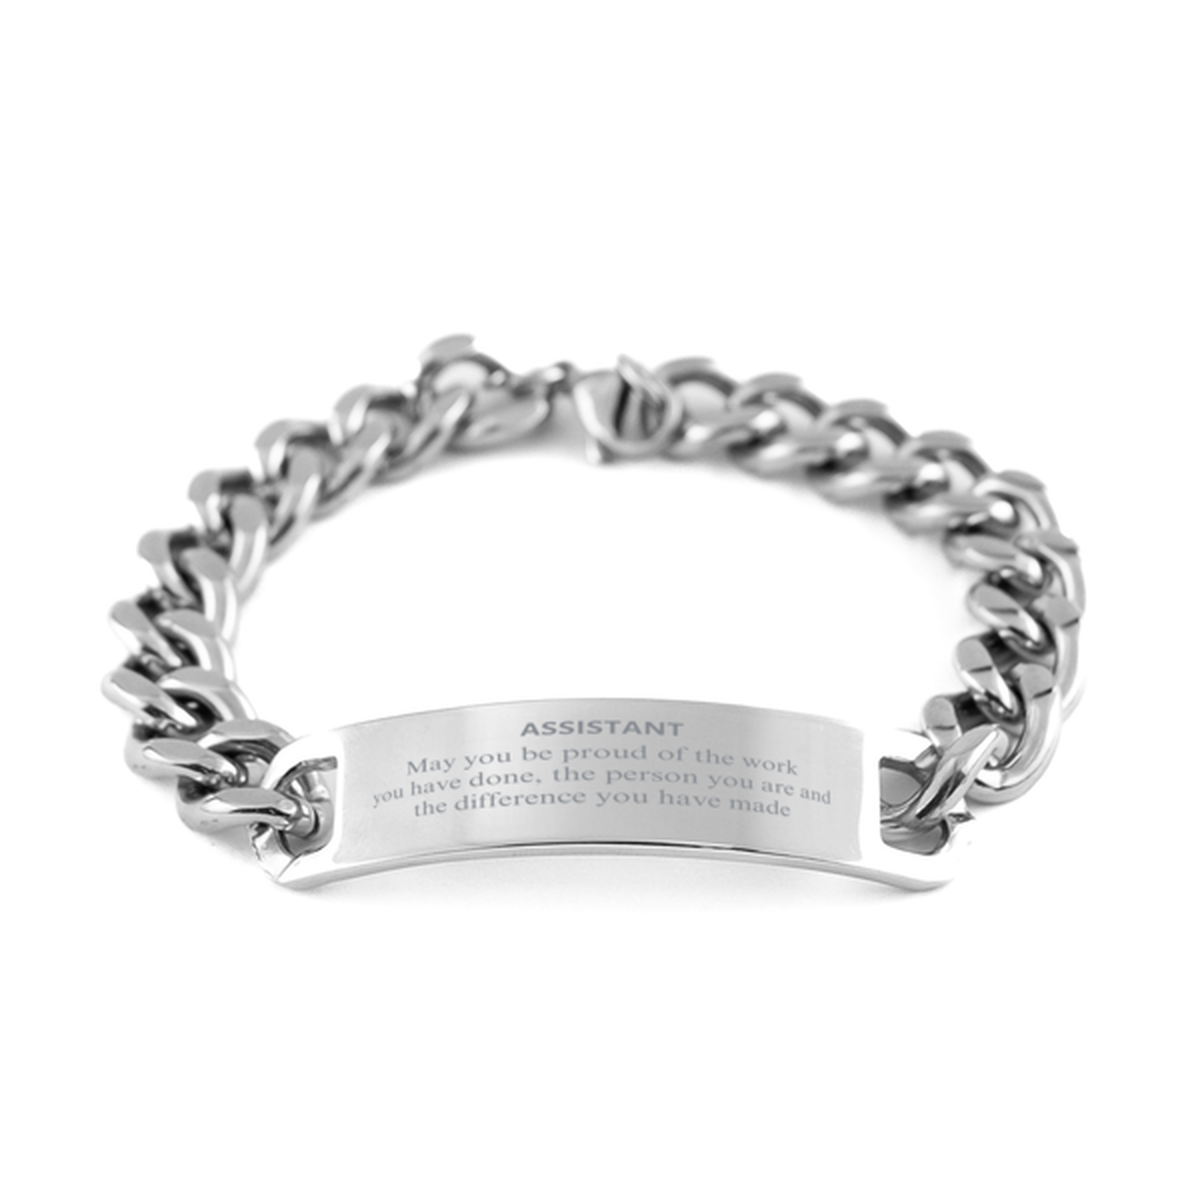 Assistant May you be proud of the work you have done, Retirement Assistant Cuban Chain Stainless Steel Bracelet for Colleague Appreciation Gifts Amazing for Assistant